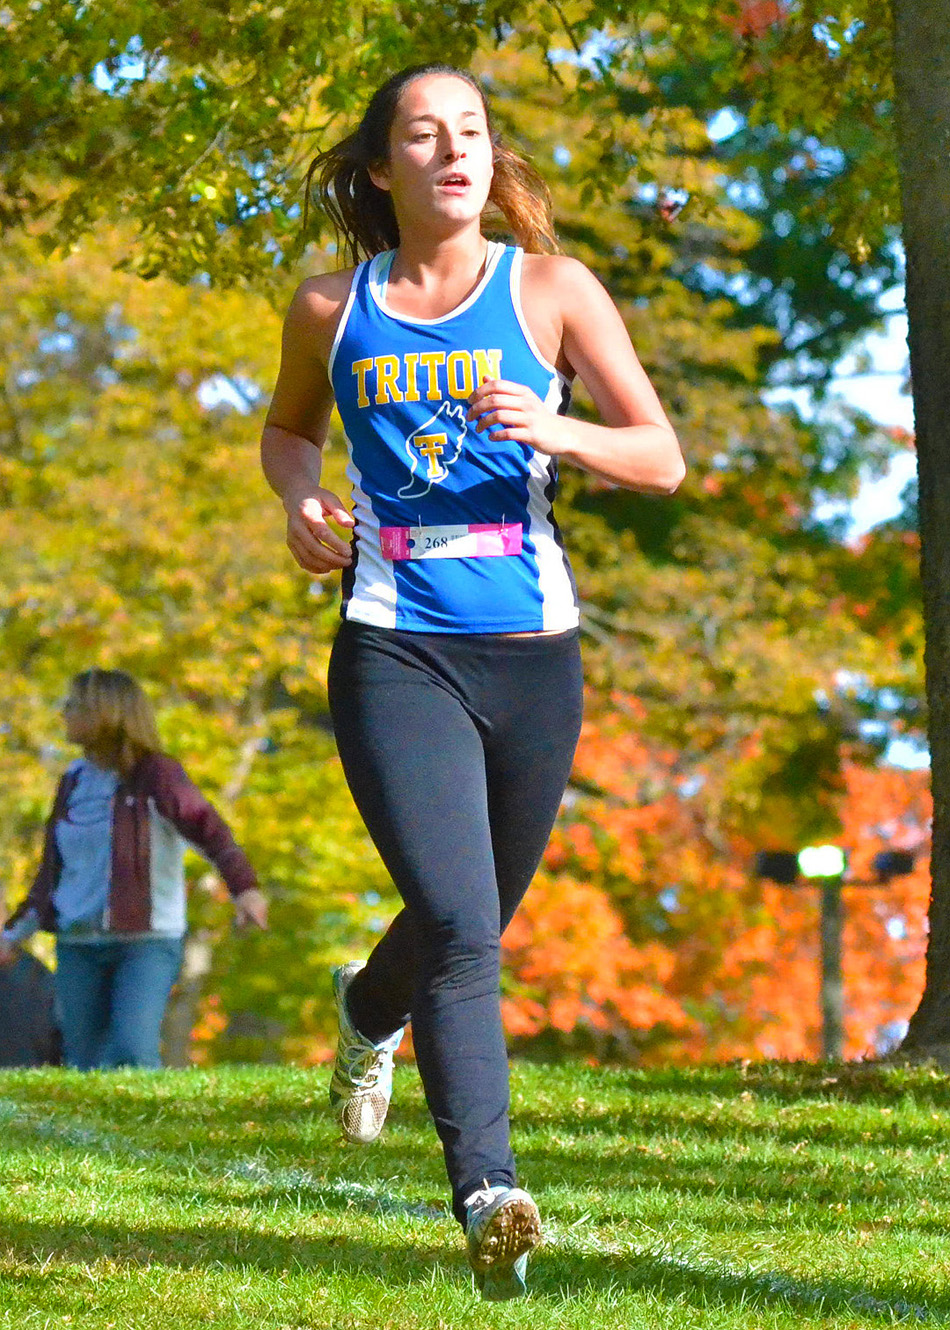 Makayla Musilli of Triton is one of two girls, along with Bailey McIntire, to qualify for the Culver Academy Regional.